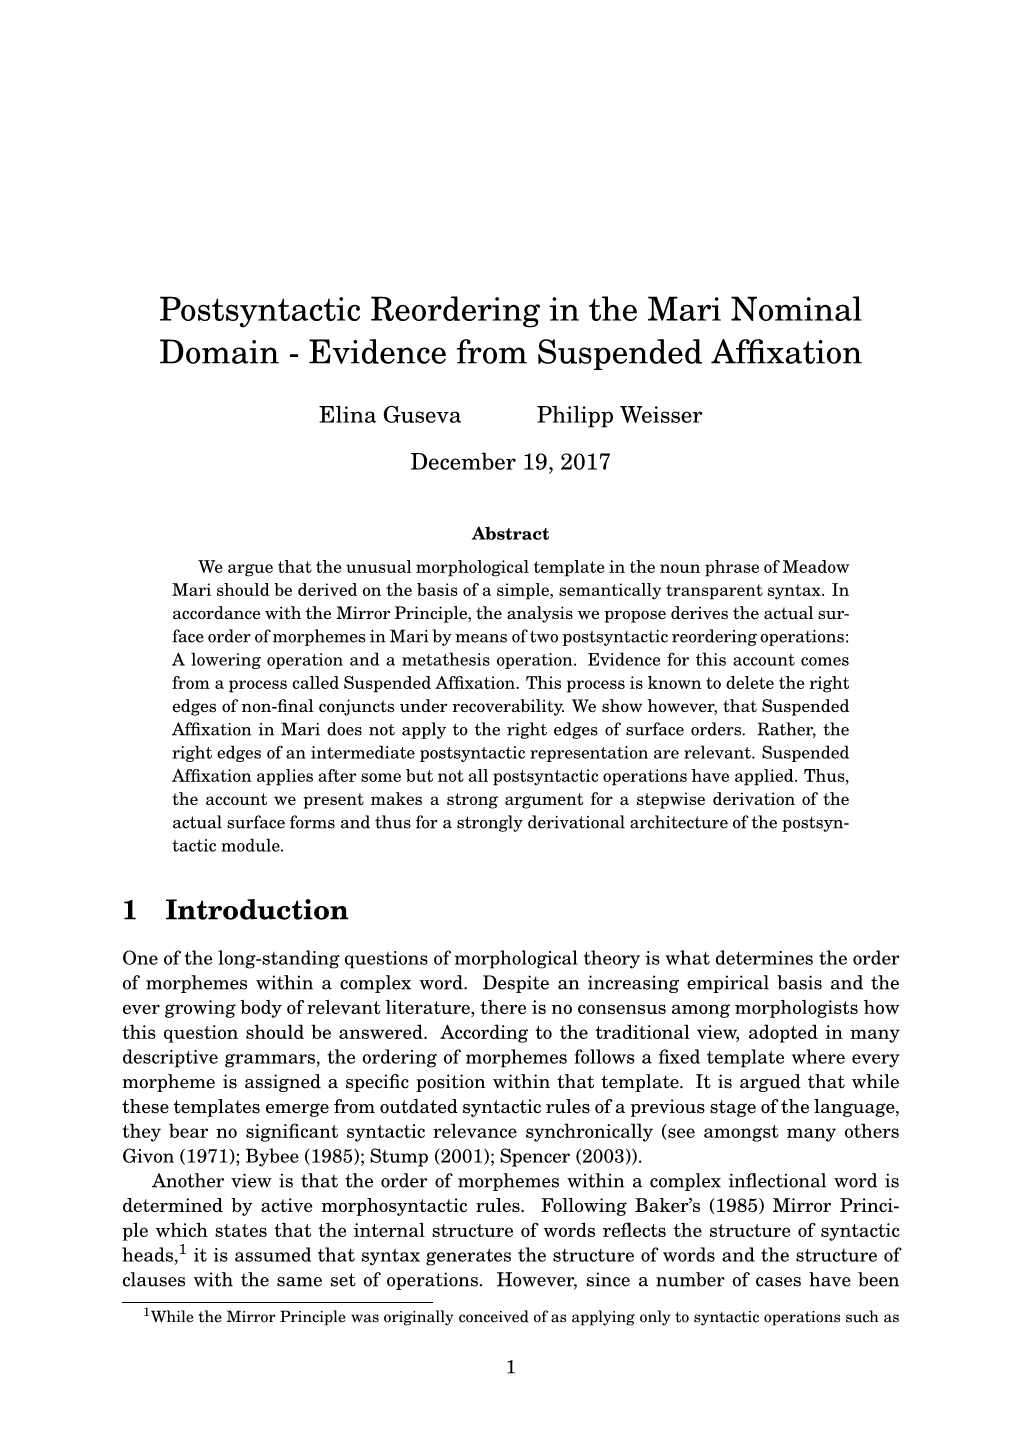 Postsyntactic Reordering in the Mari Nominal Domain - Evidence from Suspended Afﬁxation